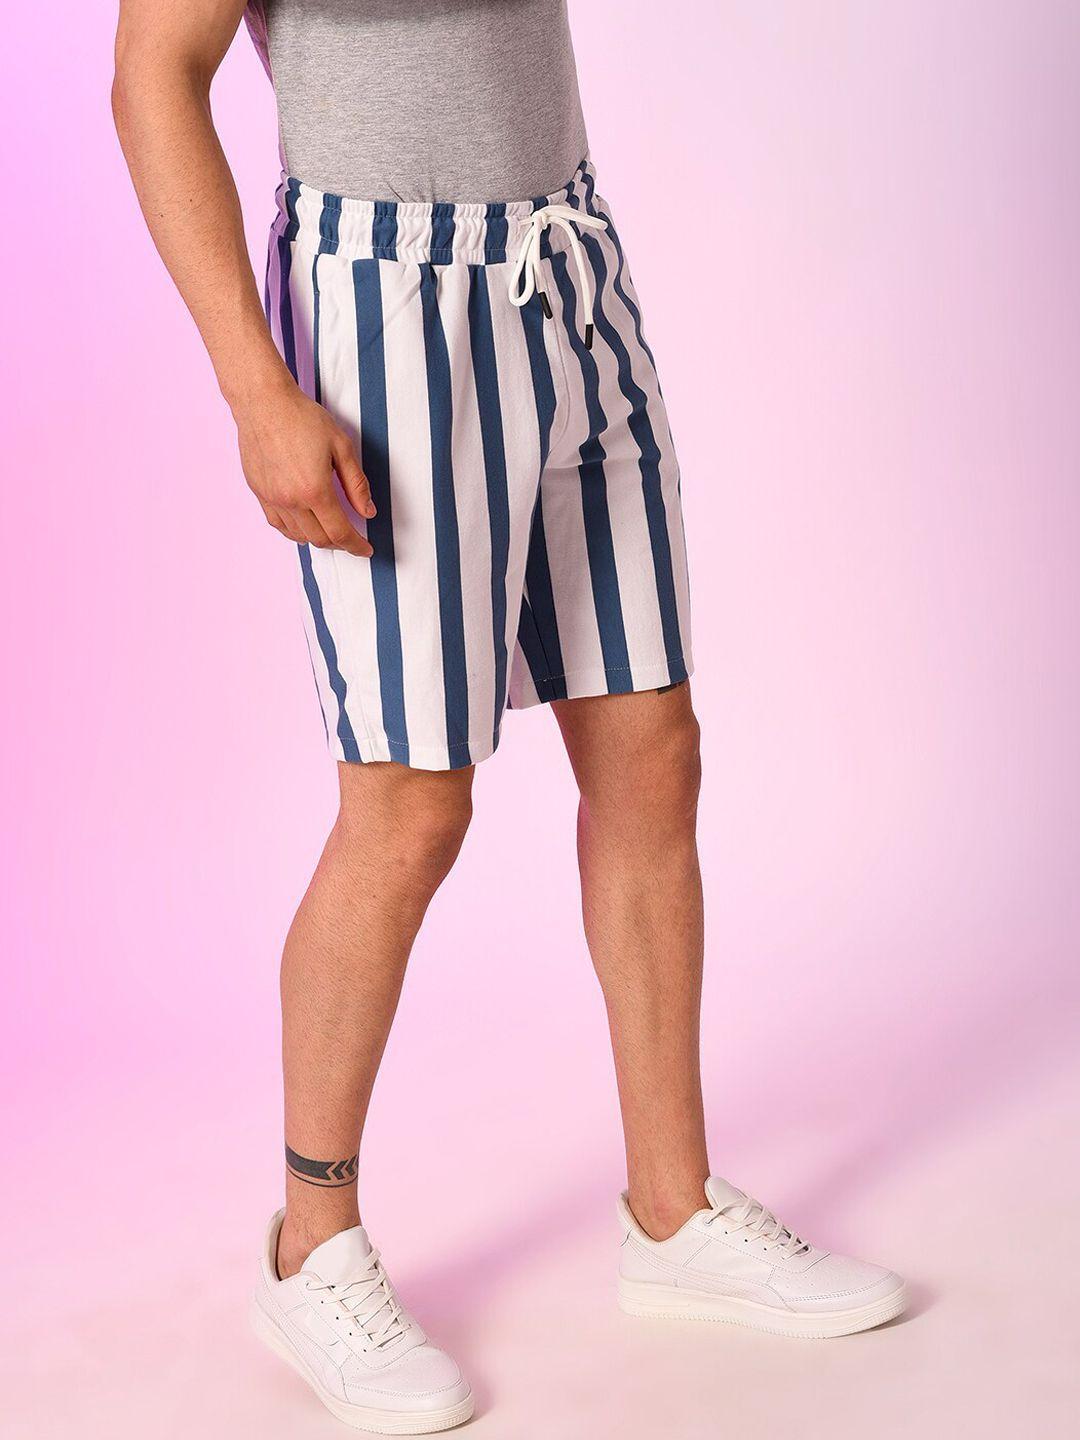 campus-sutra-men-white-&-blue-striped-outdoor-shorts